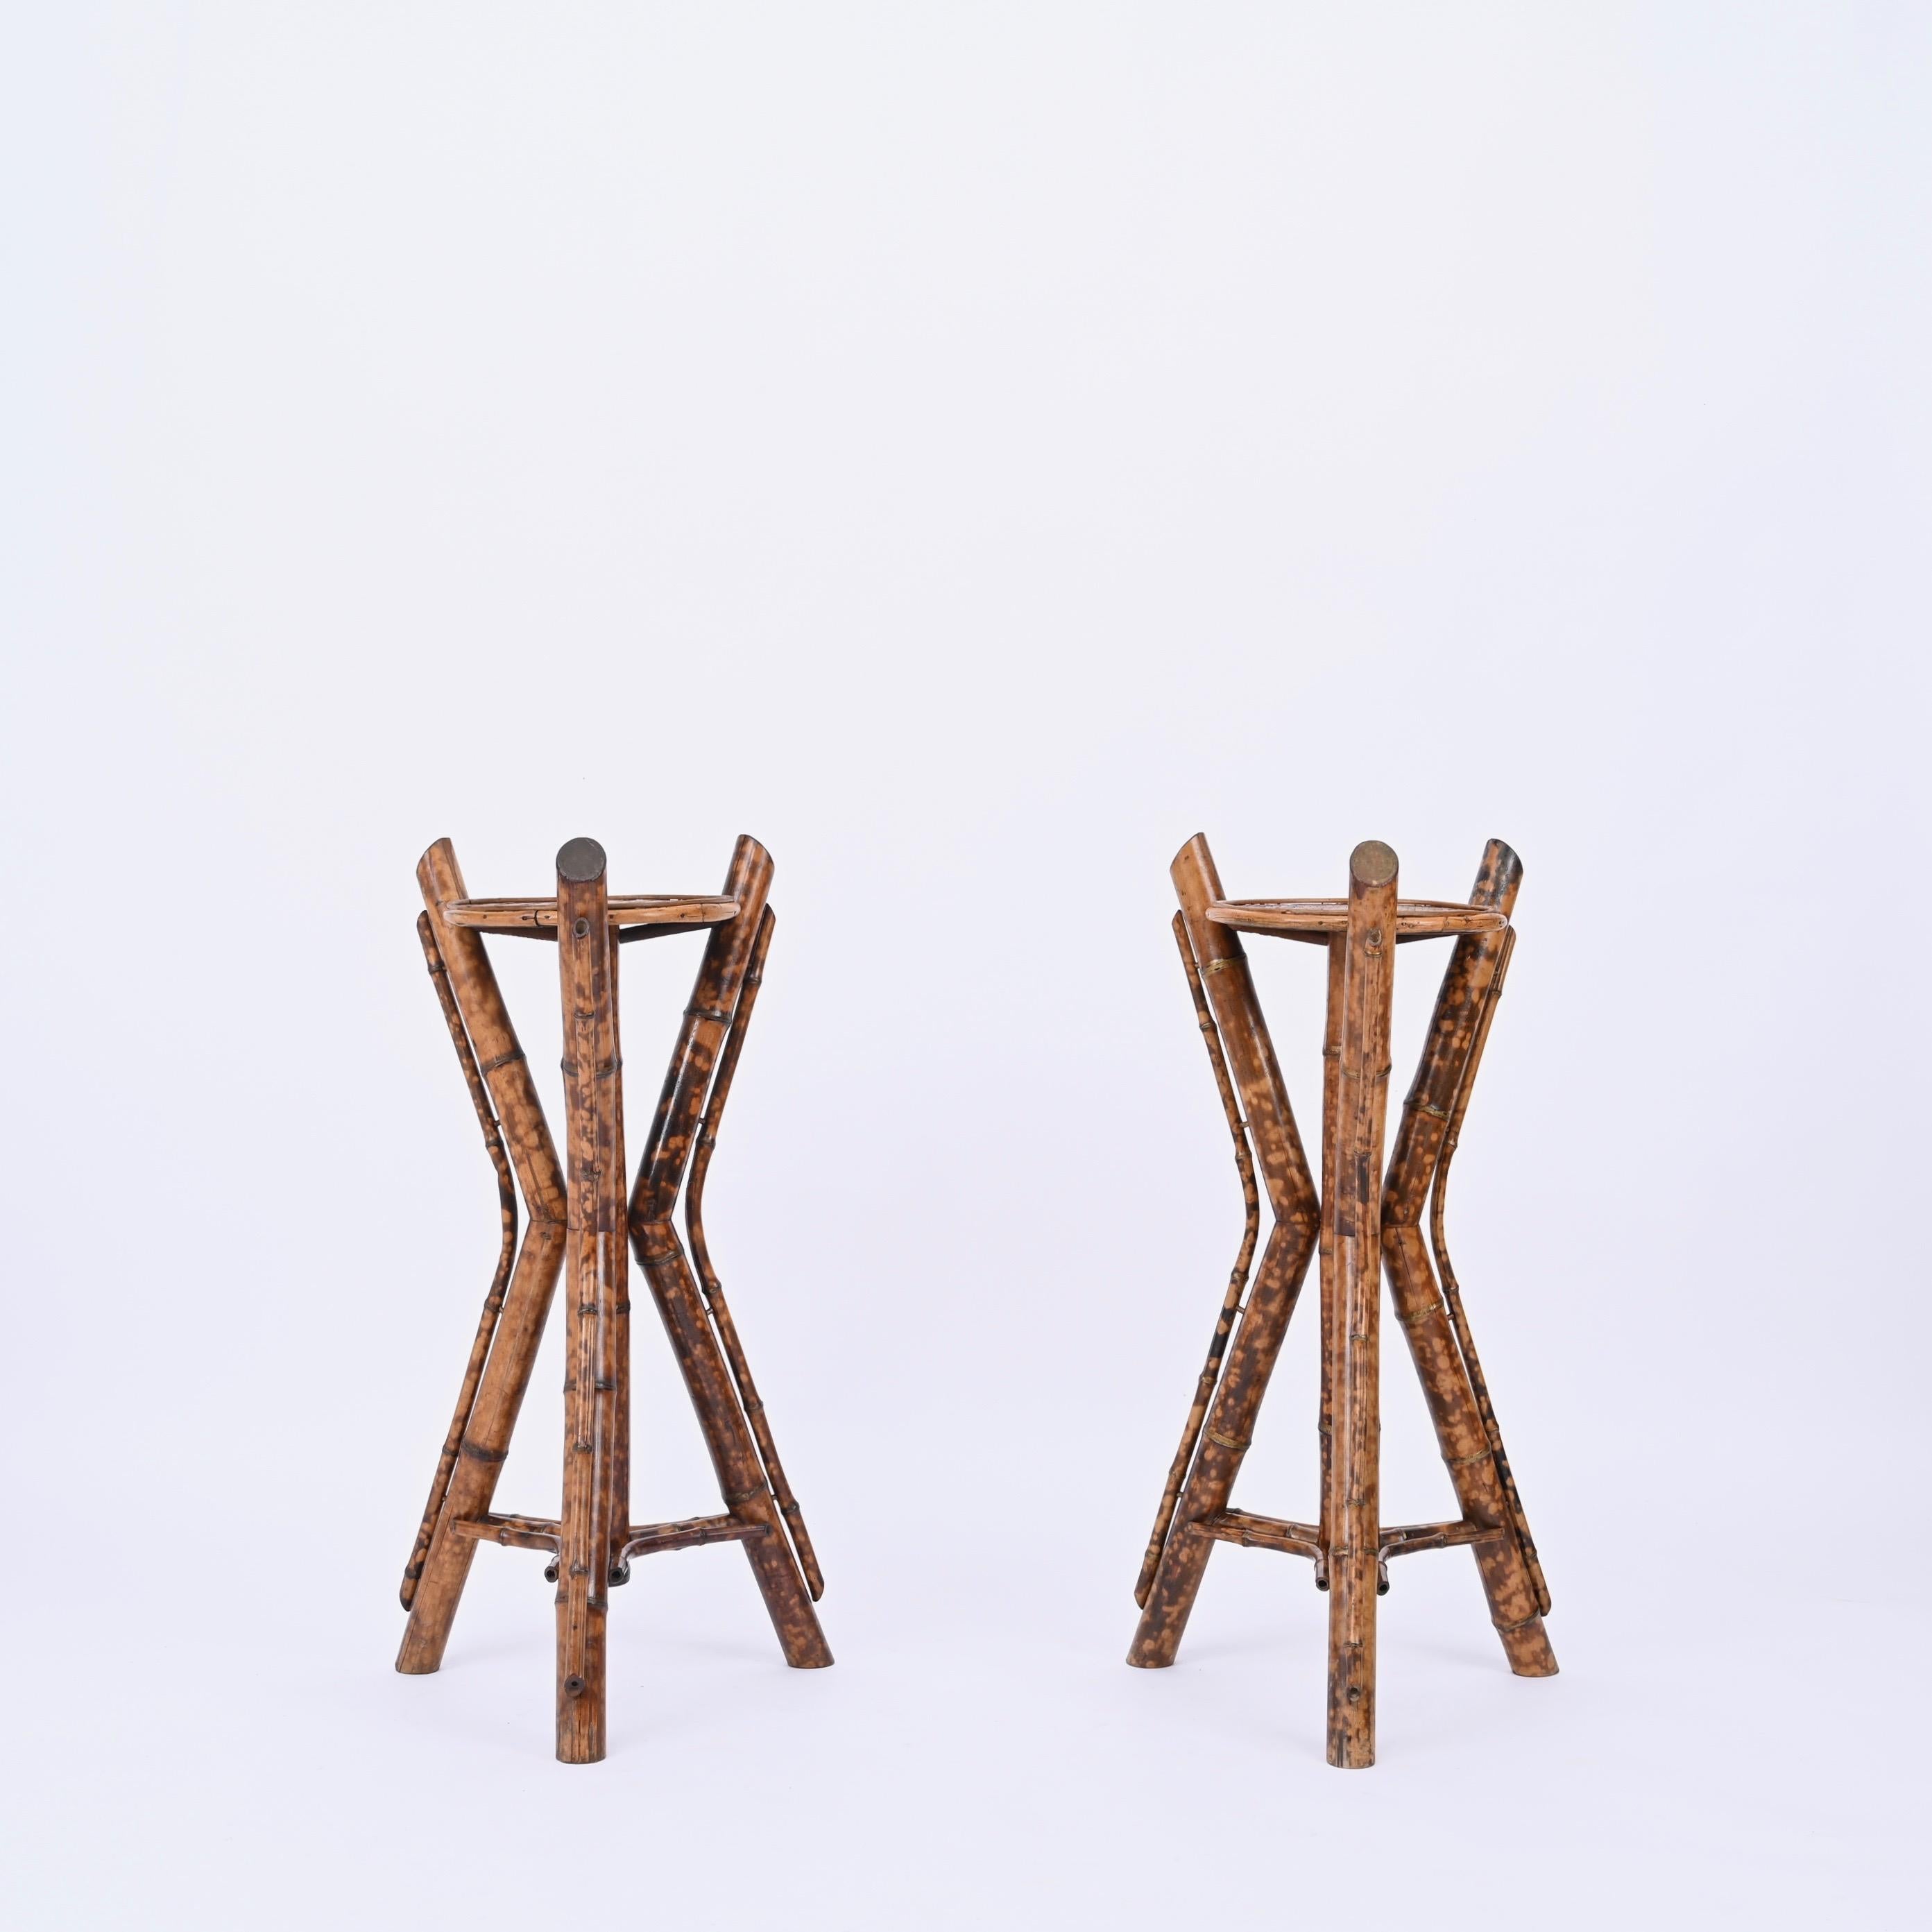 Rattan Italian Tiger Bamboo Tripod Pedestals or Plant Stands, Italy 1950s For Sale